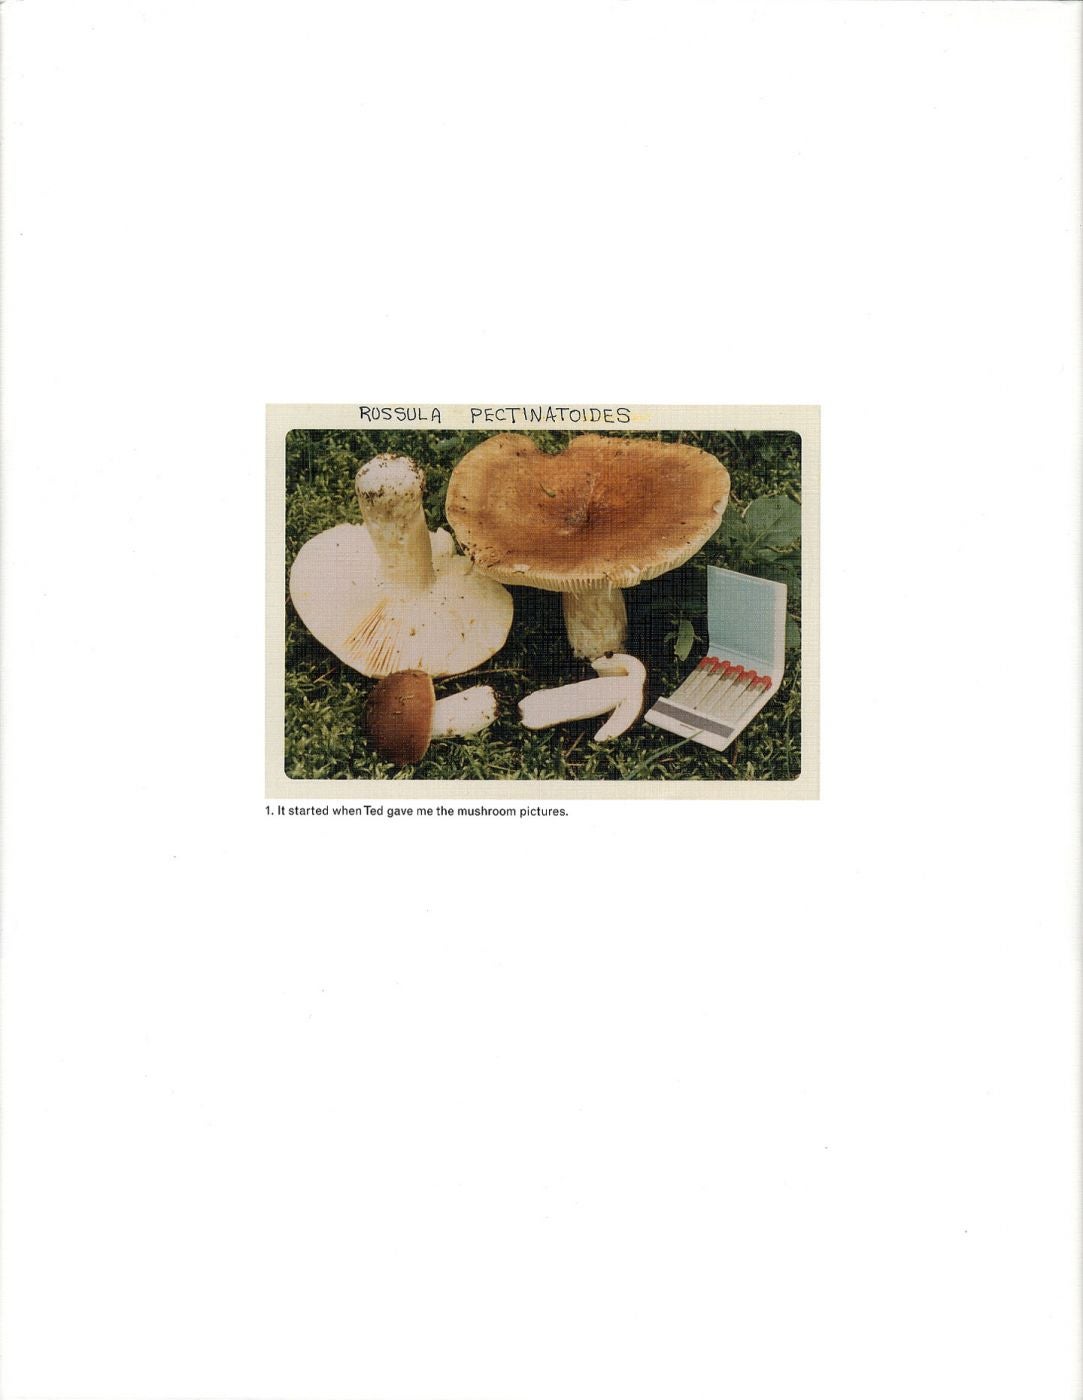 Jason Fulford: The Mushroom Collector, Limited Edition (with Print, "Folded Paper" Variant)